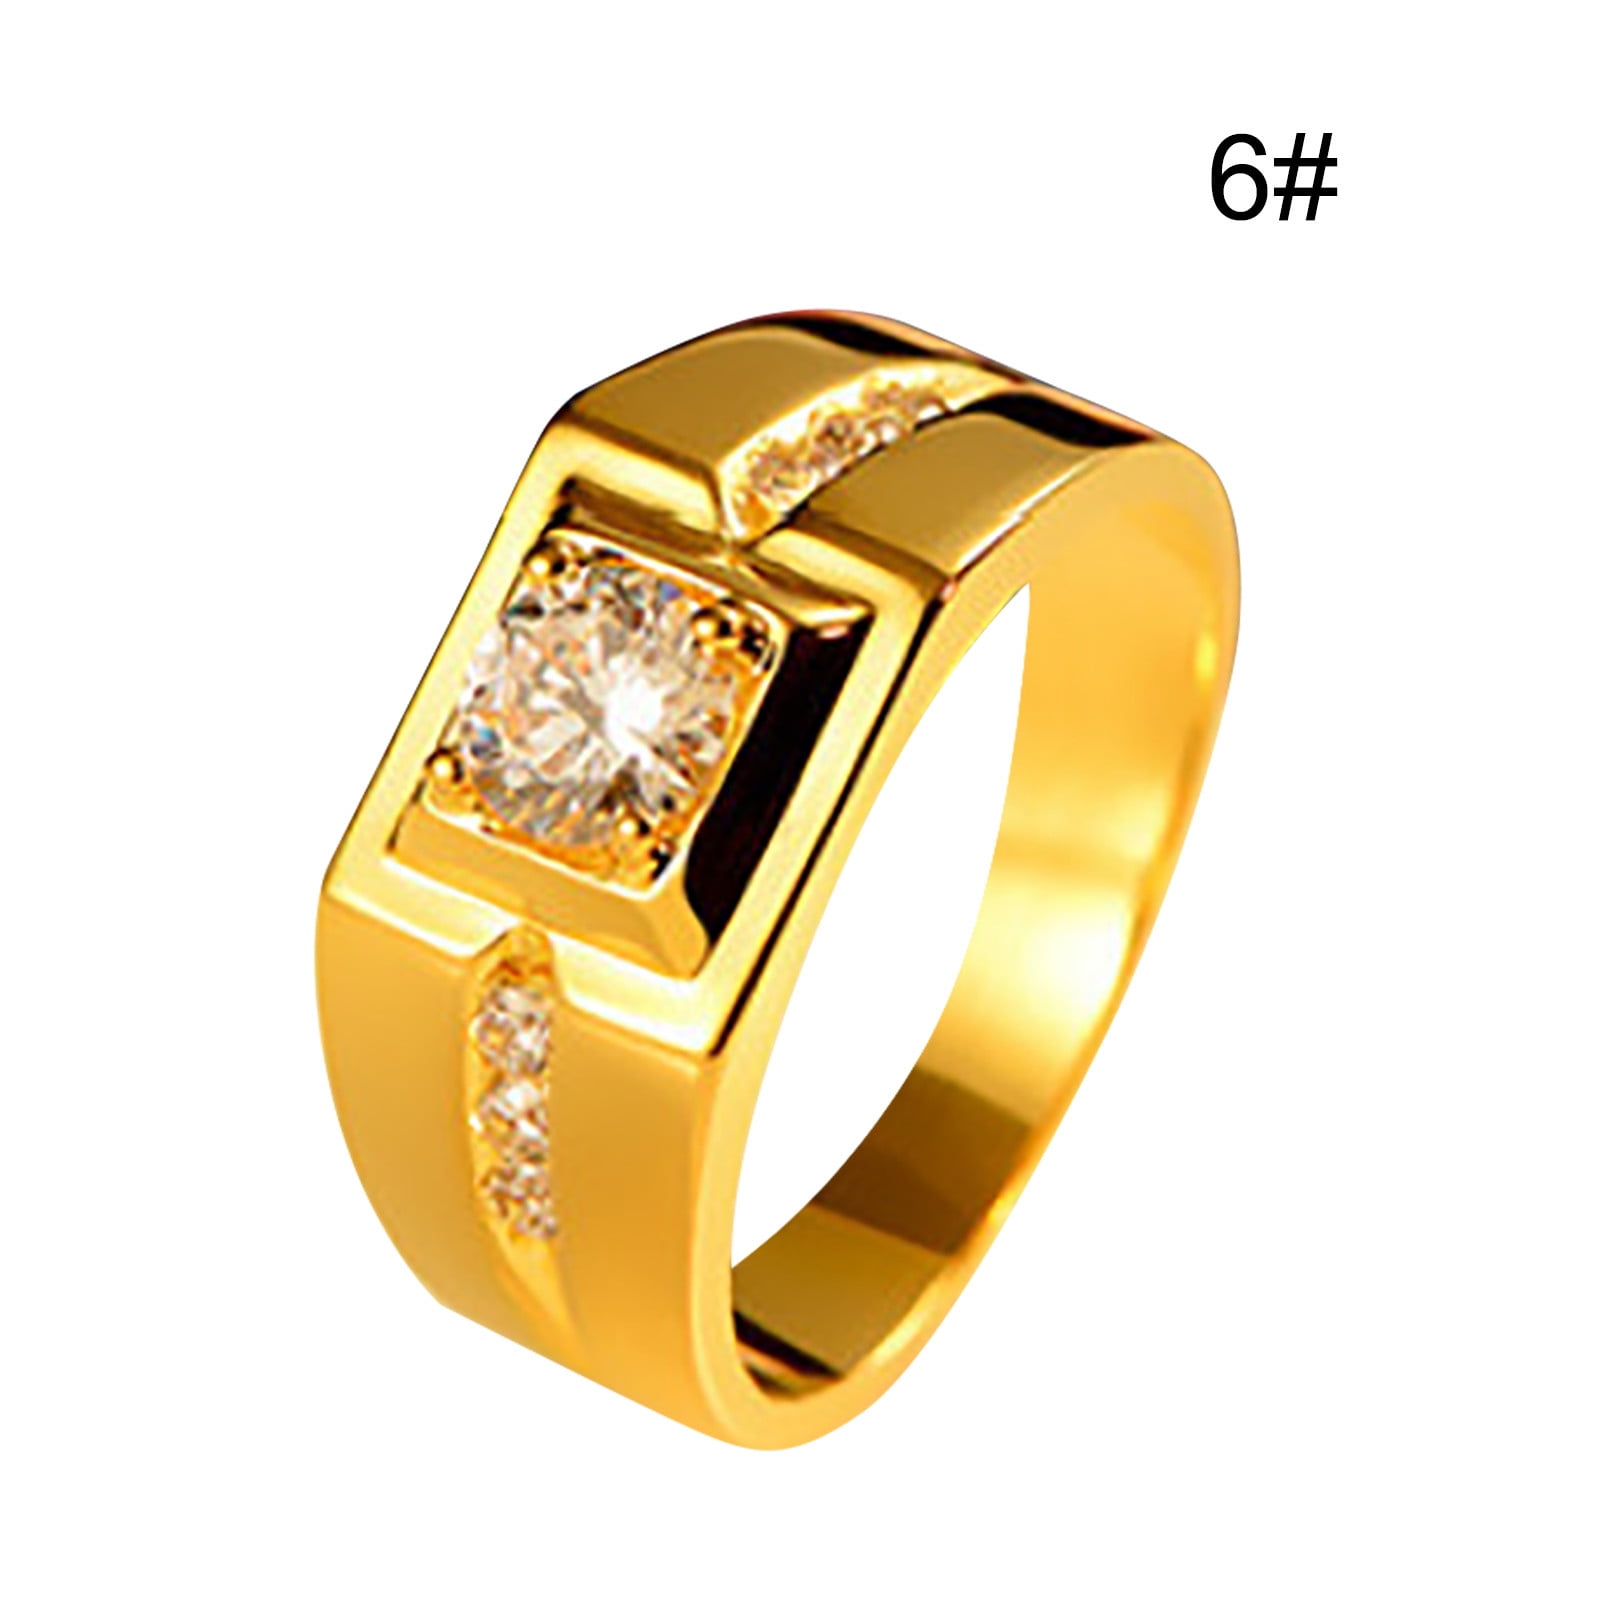 Gentleman Temperament Plated 24K Gold Ring Men s Domineering Ring Eternal Engagement Wedding Ring 9a51c653 f8dc 4a28 ace3 a9ba13aaa889.47ba6153cfebbf89c922b06315029651